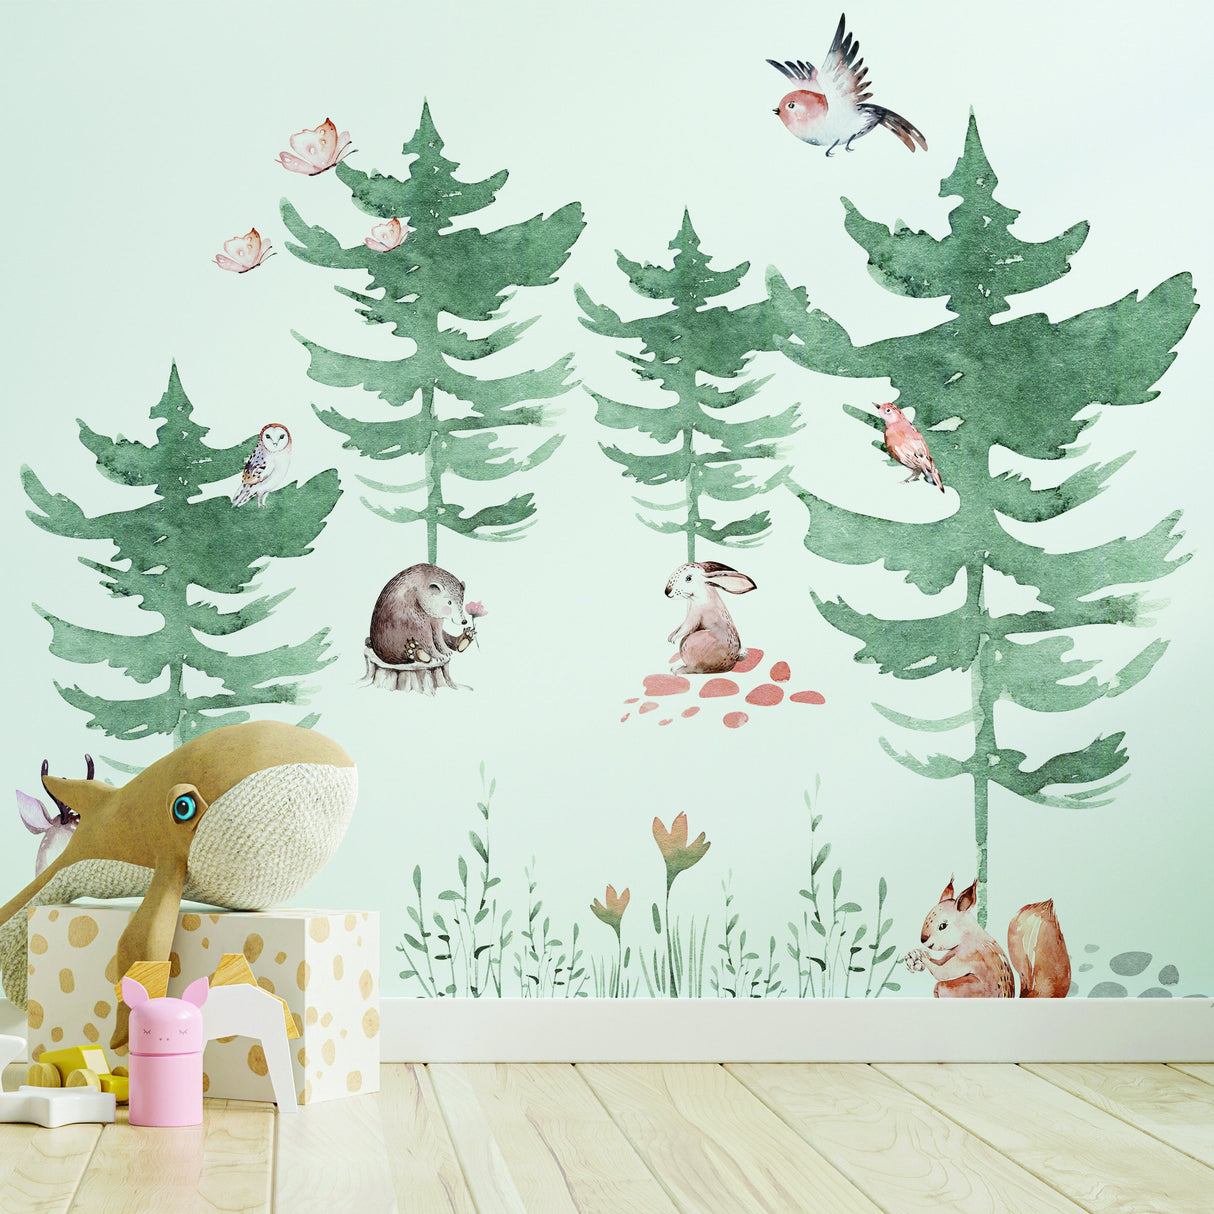 Woodland Wonders Vinyl Wall Decal Set - Whimsical Animal & Forest Theme Stickers